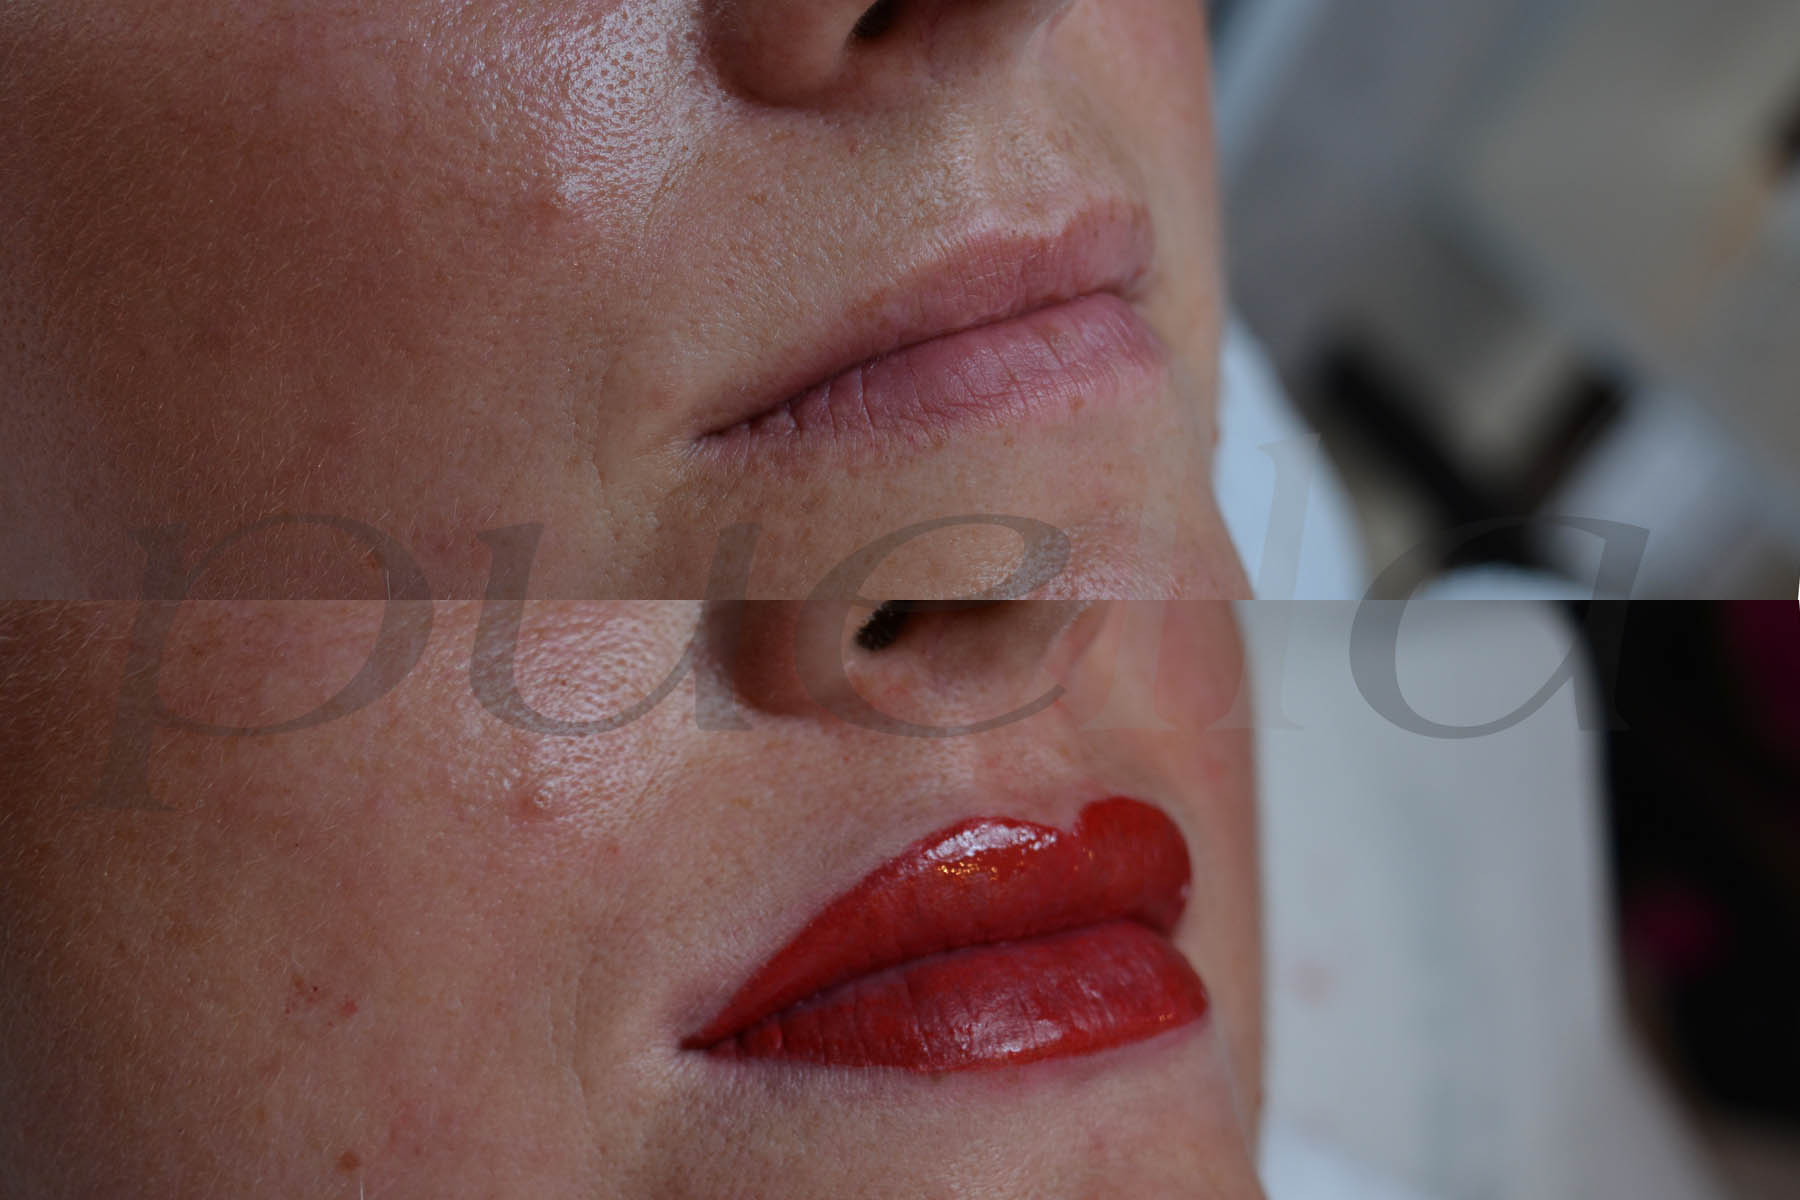 Permanent makeup by Puella Beauty - lips before and after image